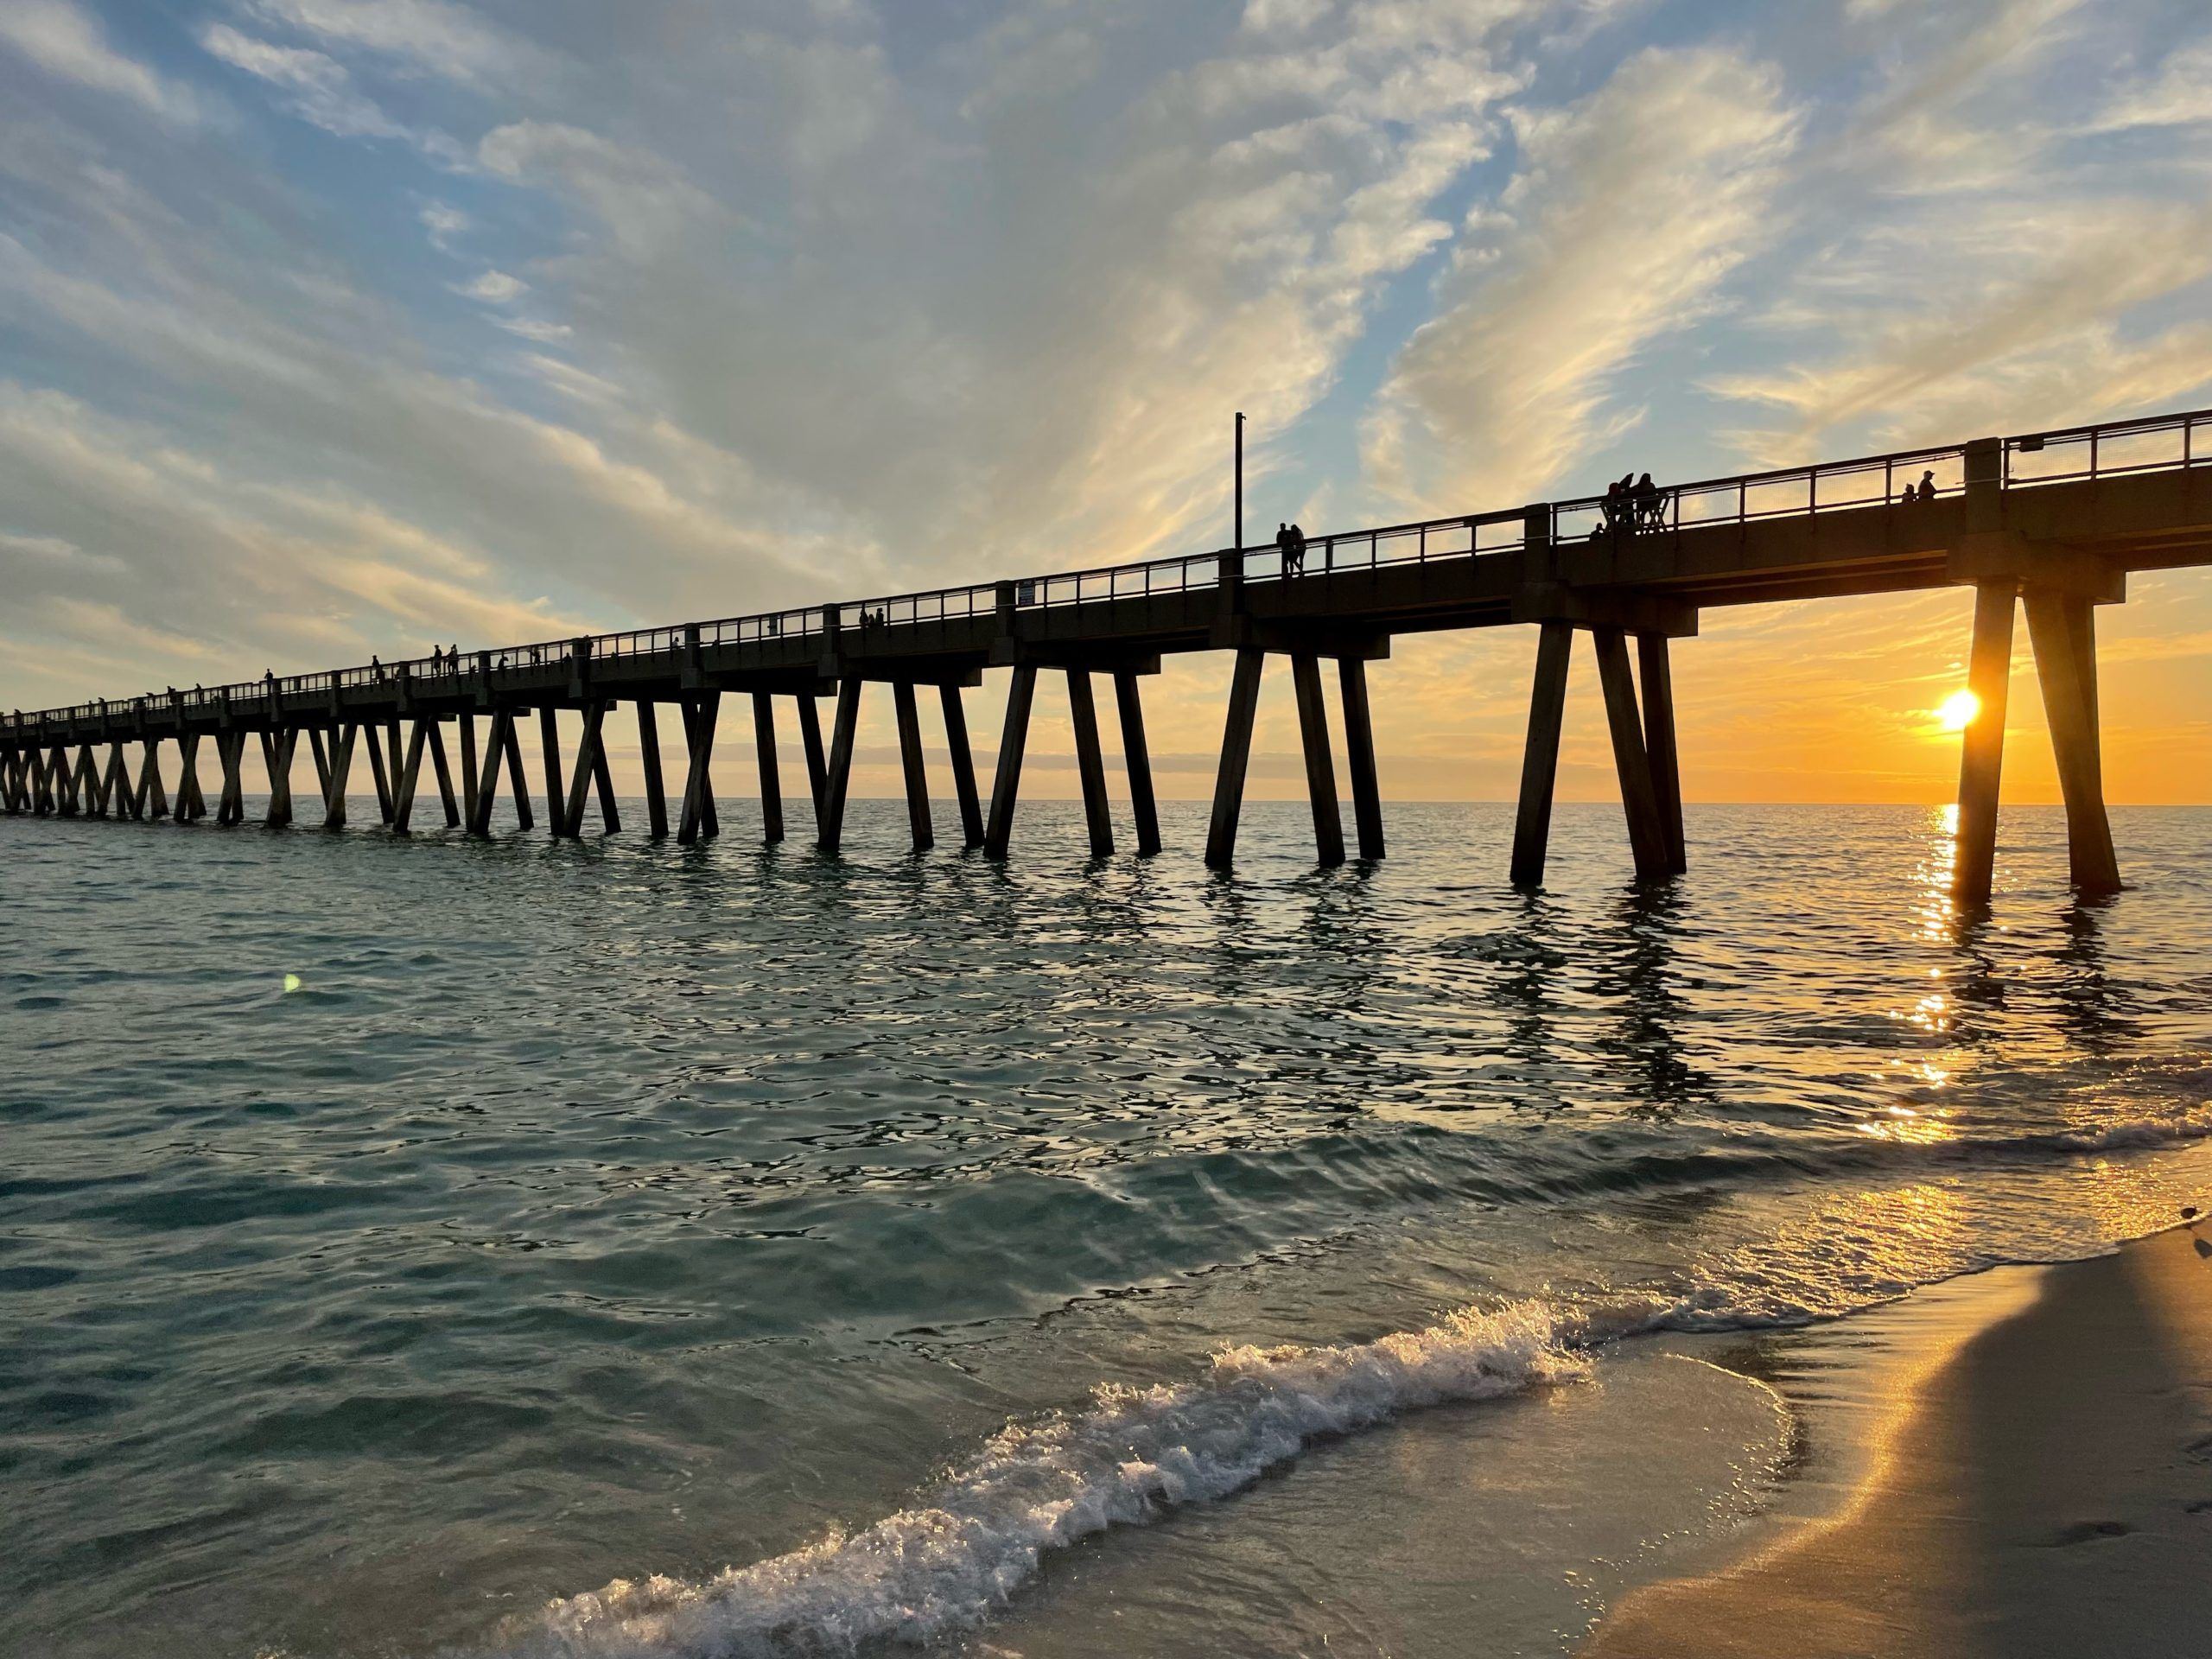 Janine Satkin submitted this picture of Navarre Beach as a Navarre Press Photo of the Day.